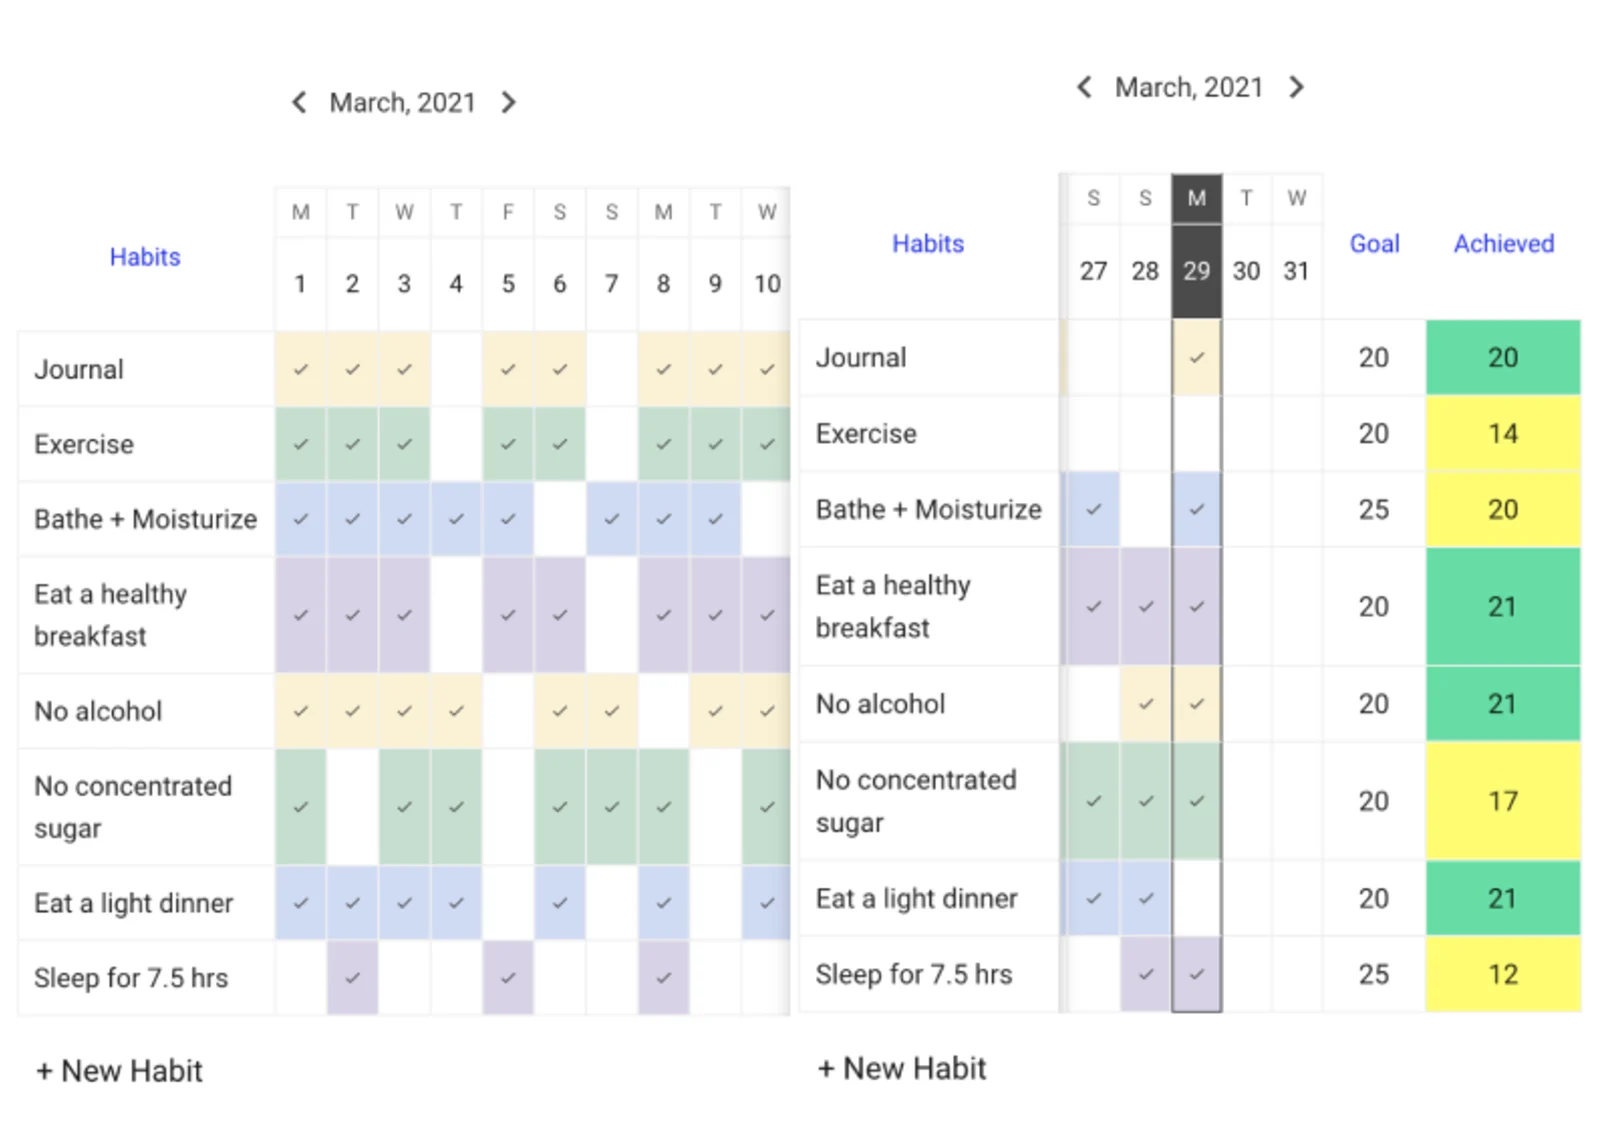 DailyHabits is a simple and easy habit tracker to help create new habits and routines.